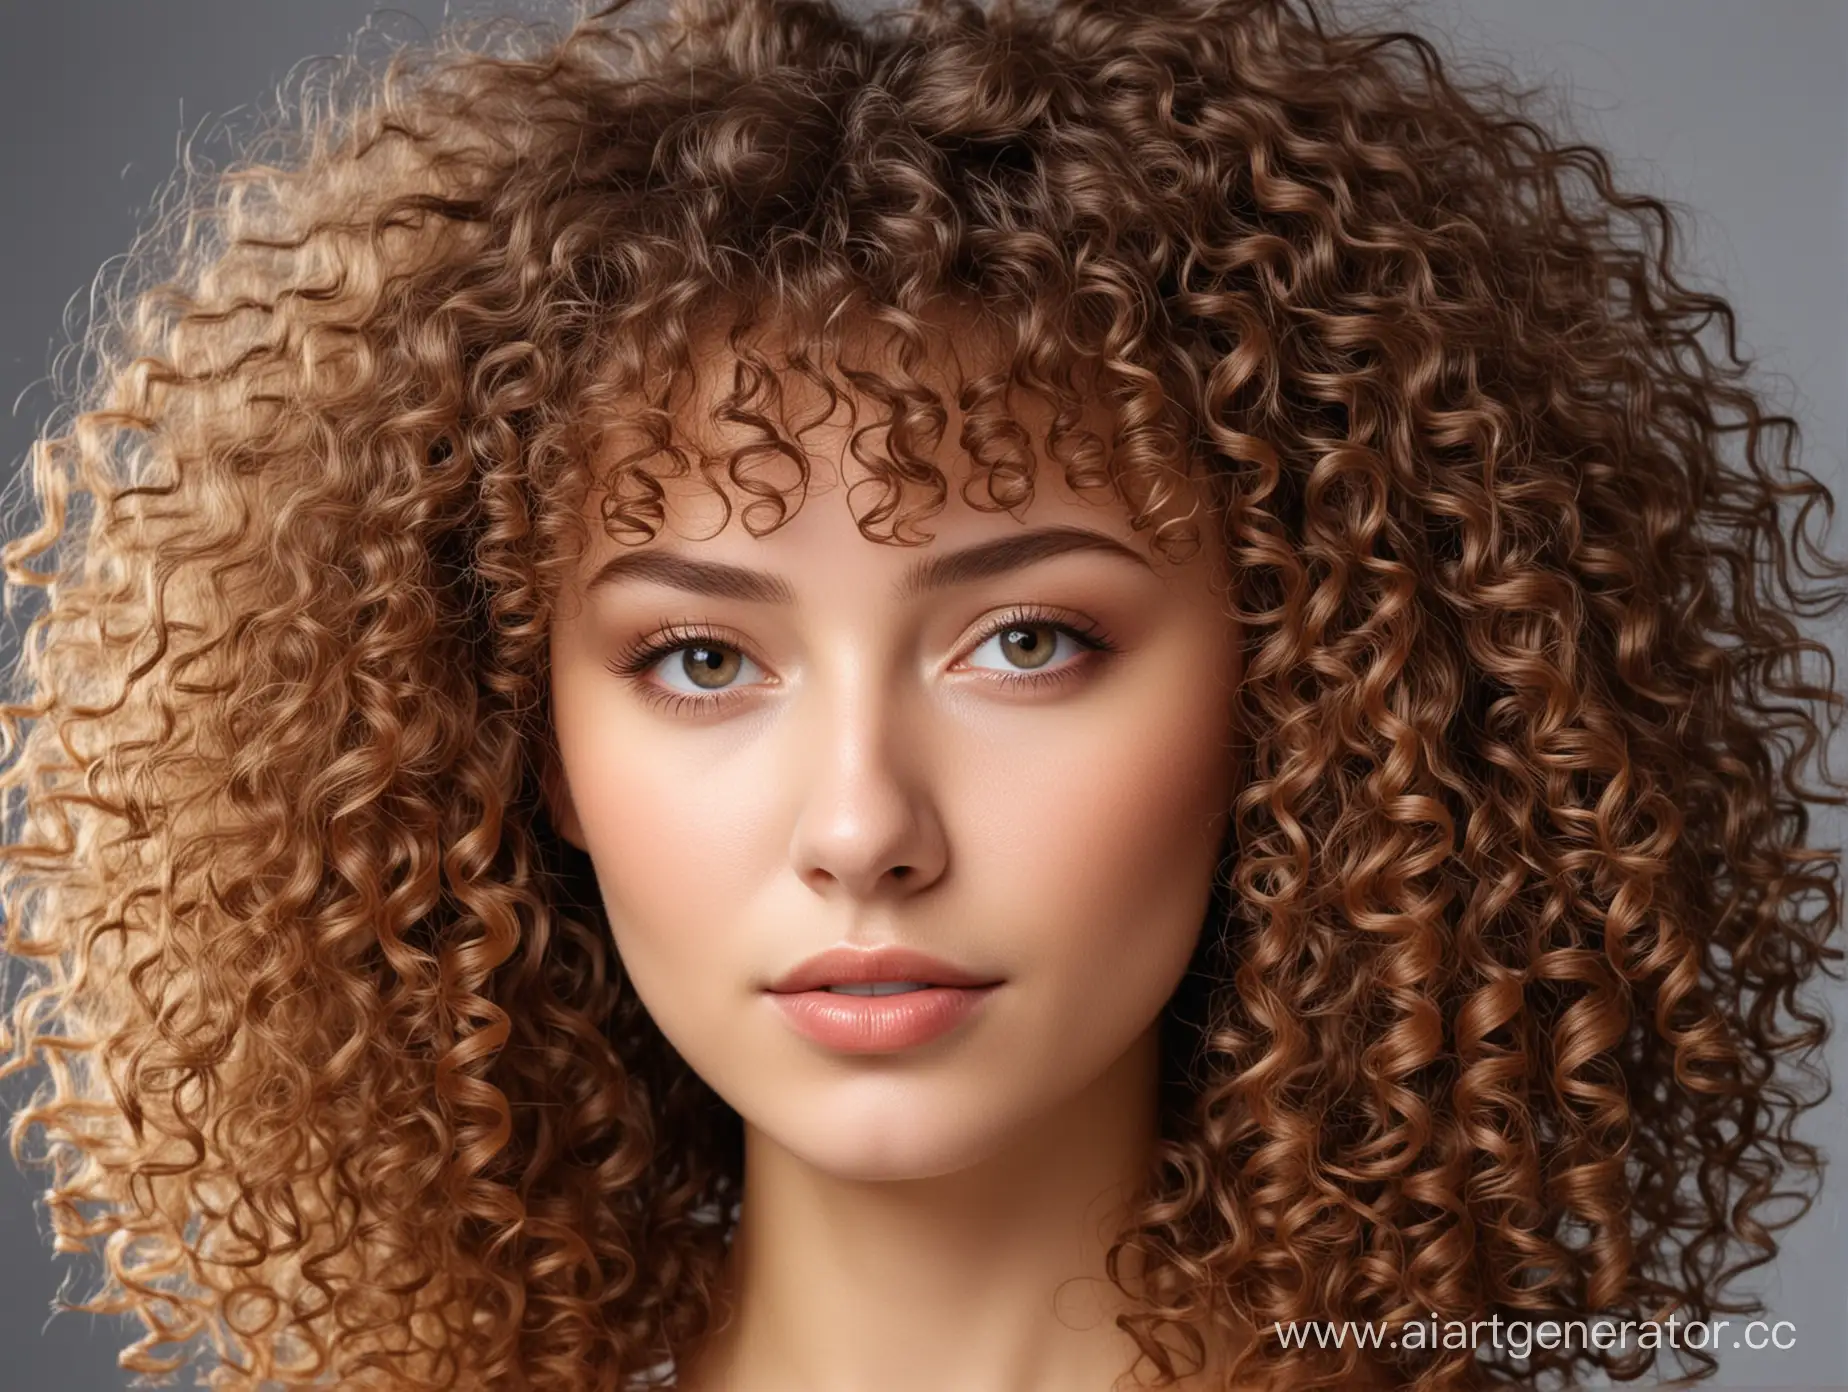 Portrait-of-a-Stylish-Girl-with-Chemical-Perm-Hairstyle